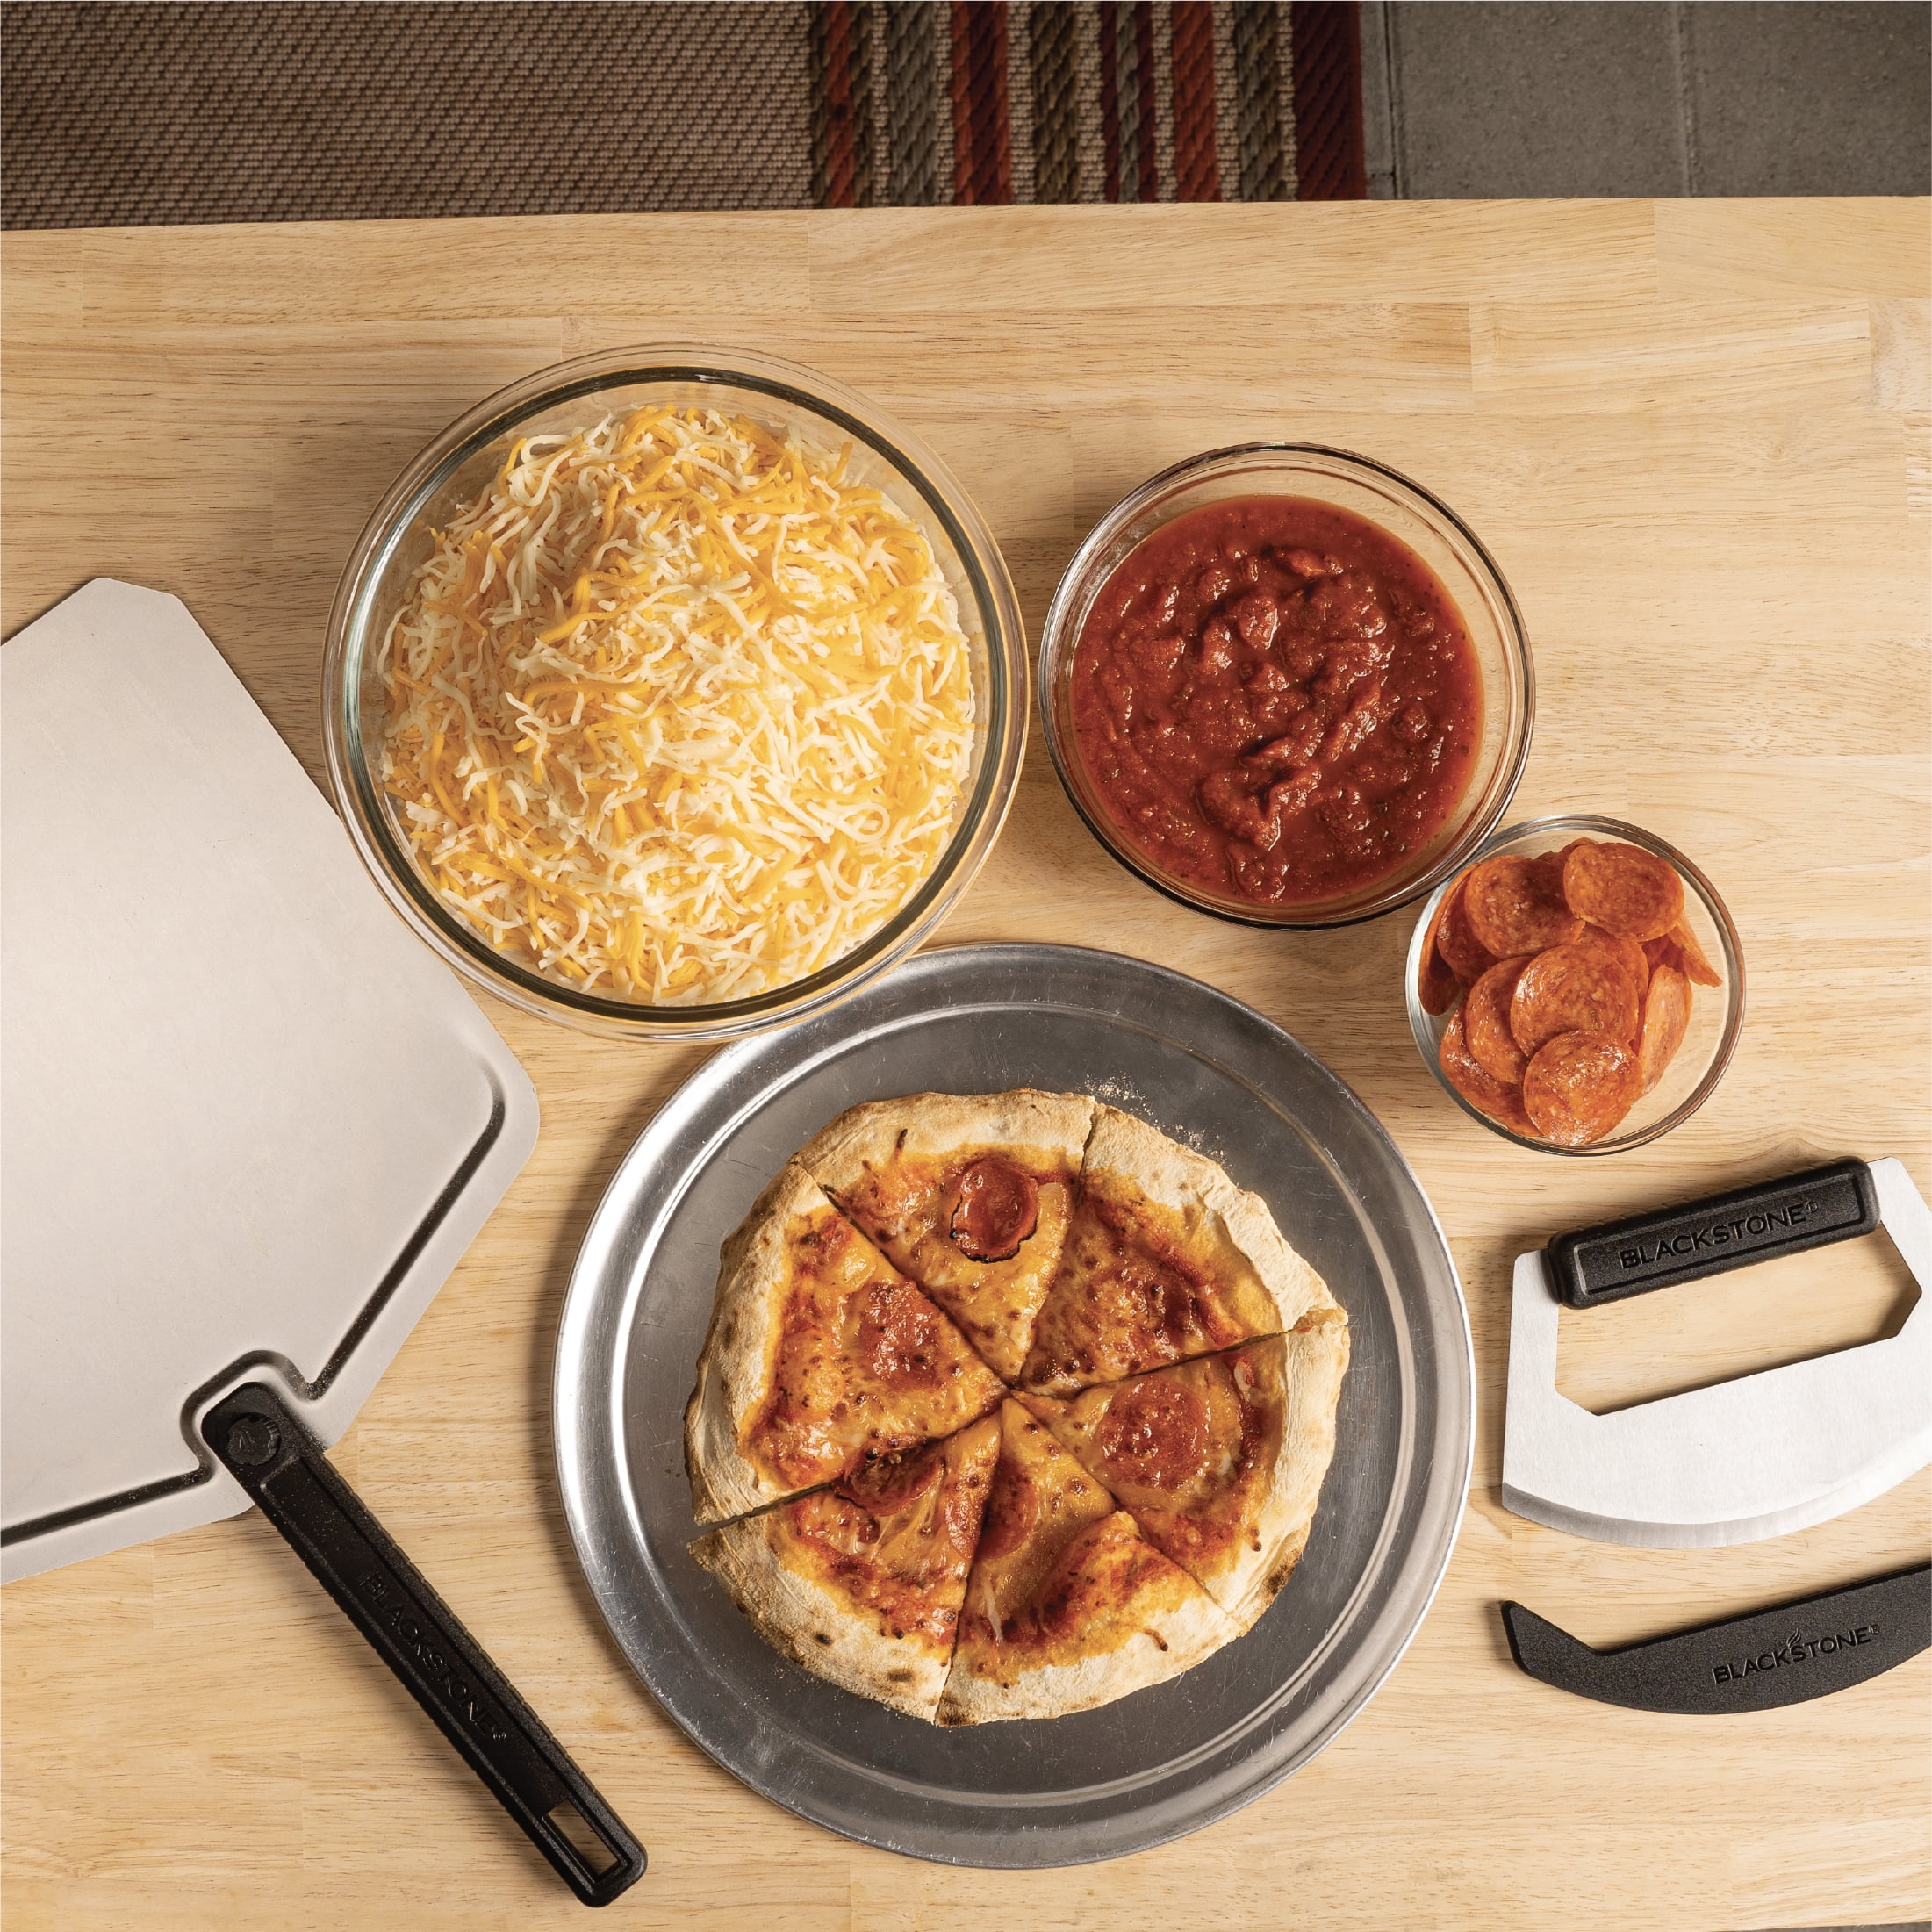 Blackstone Pizza Kit with Pizza Cutter, 3-Piece Peel, Aluminum and Tray